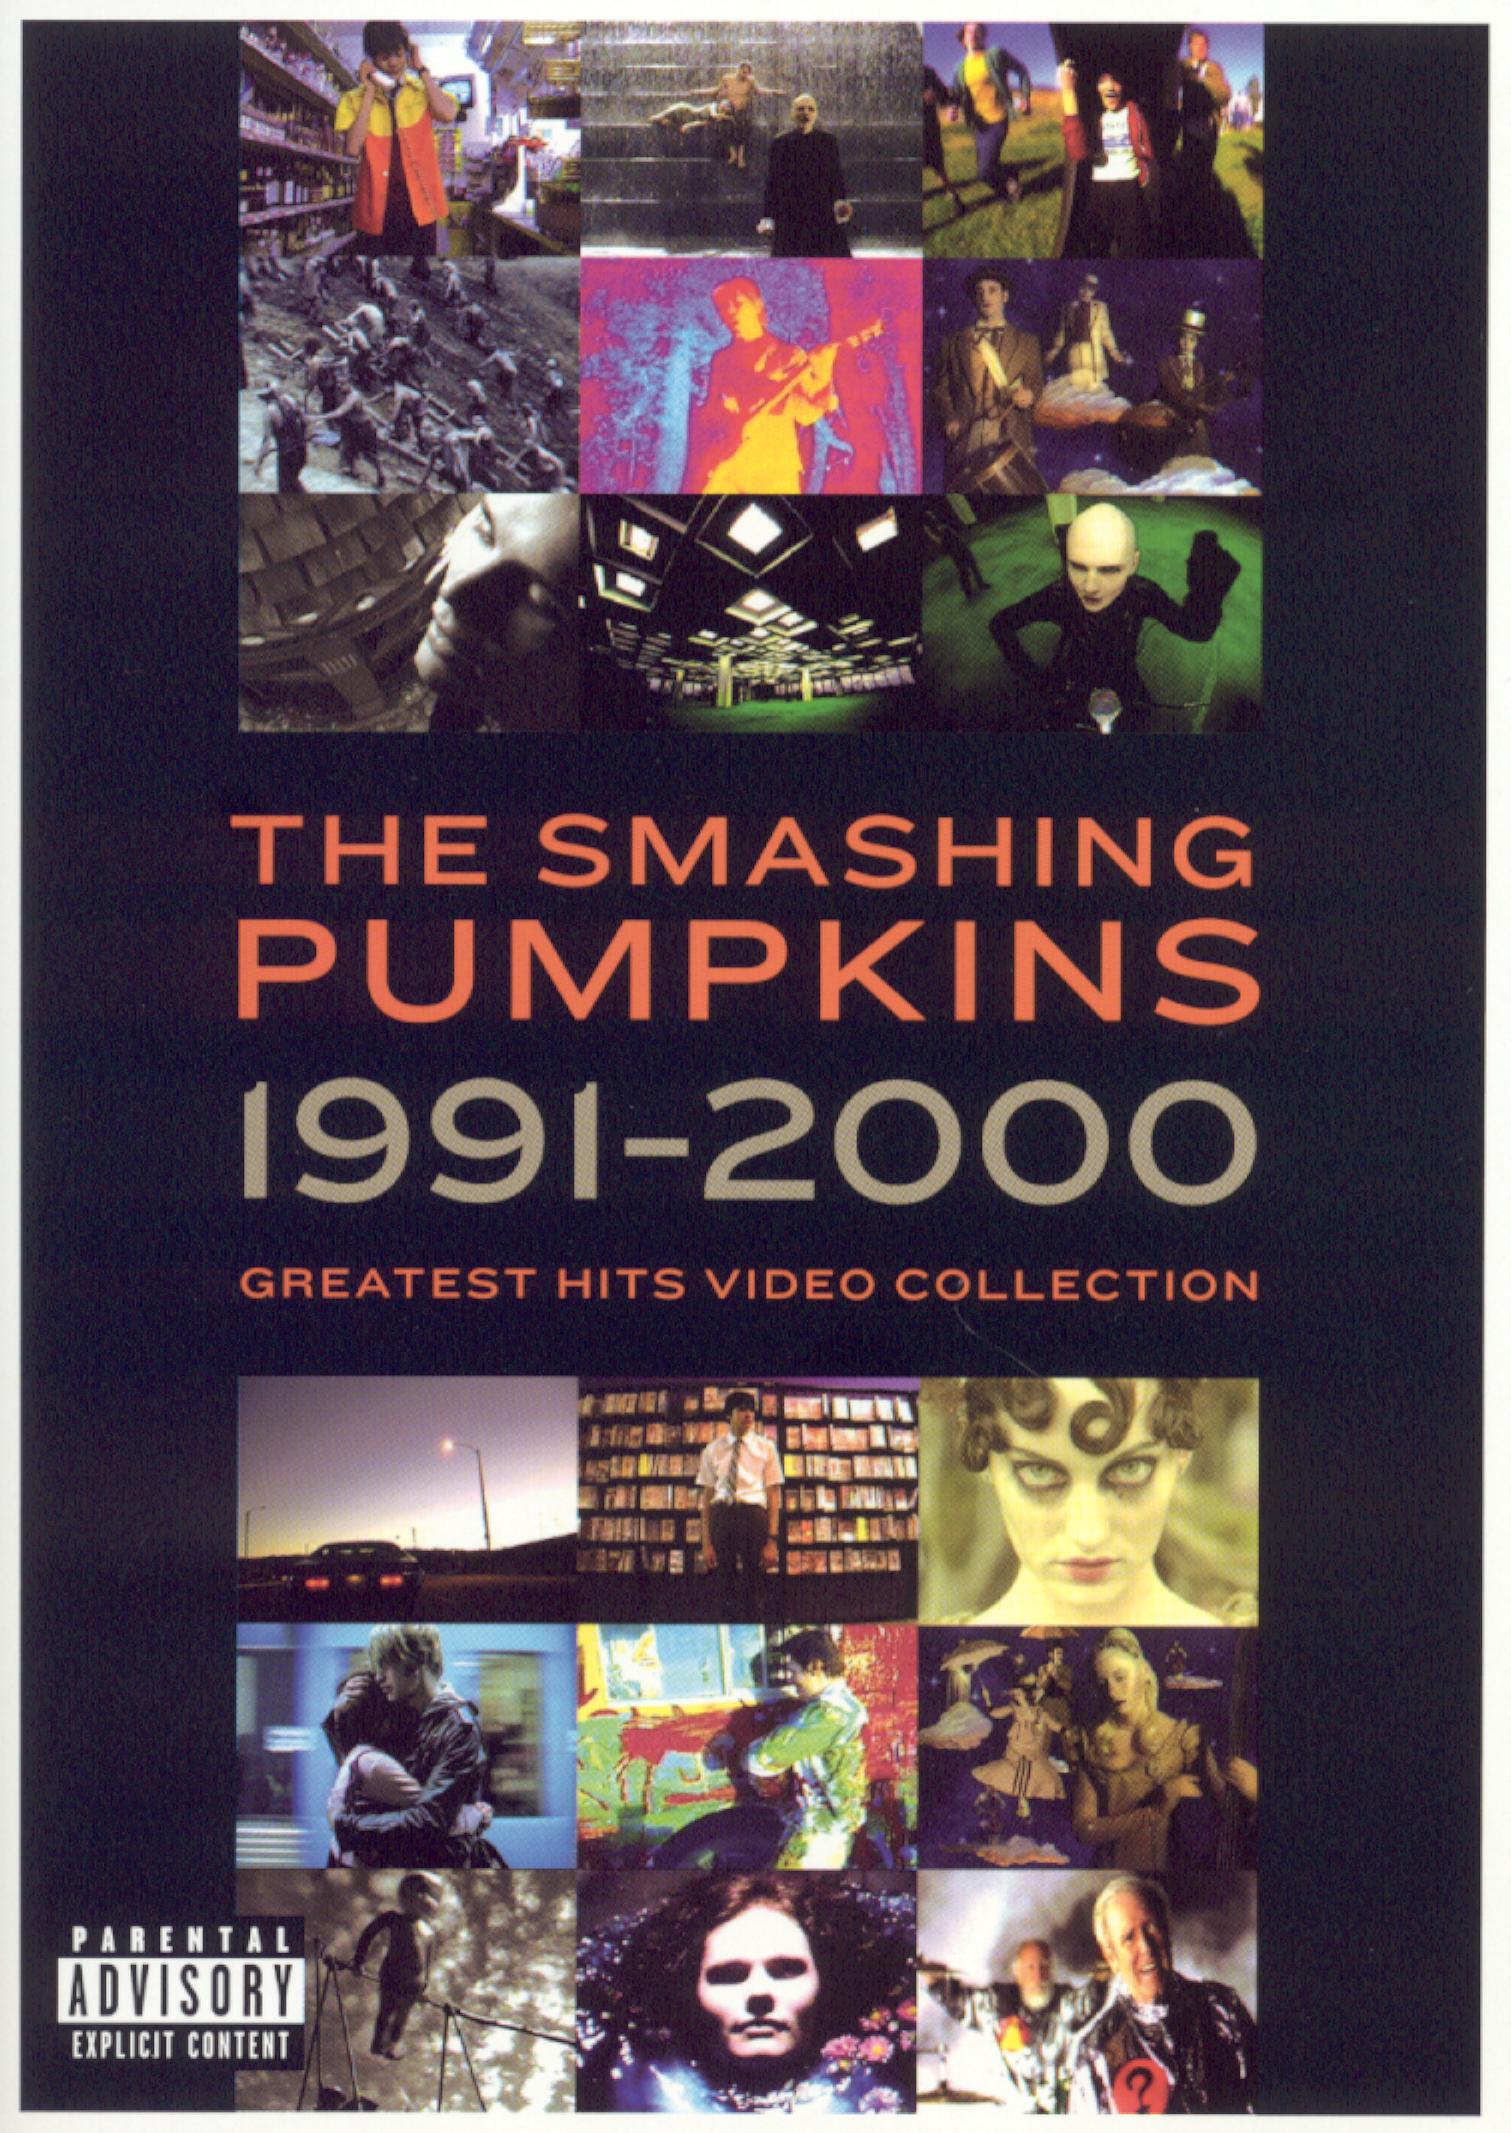 Best Buy: The Smashing Pumpkins: 1991-2000 Greatest Hits Video 